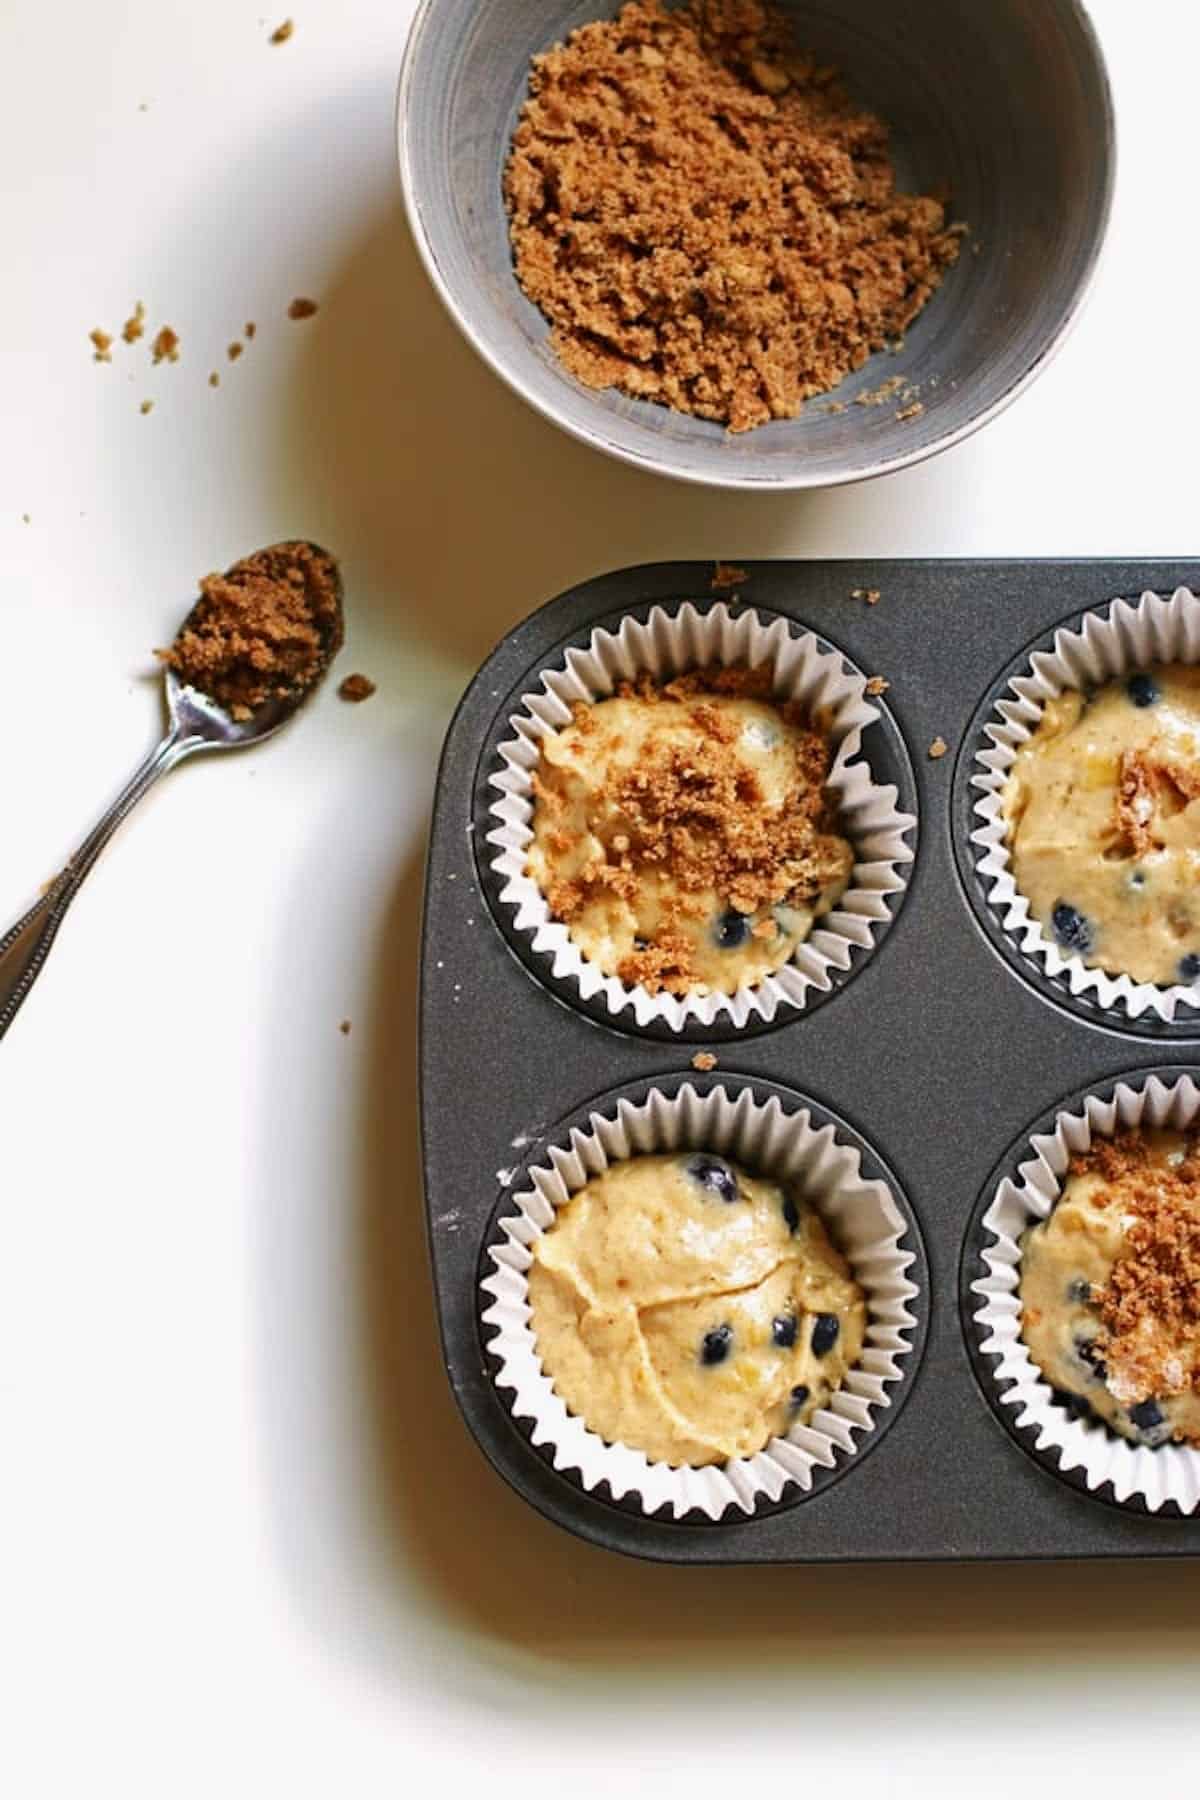 Muffin batter in lined muffin cups with brown sugar topping sprinkled over them